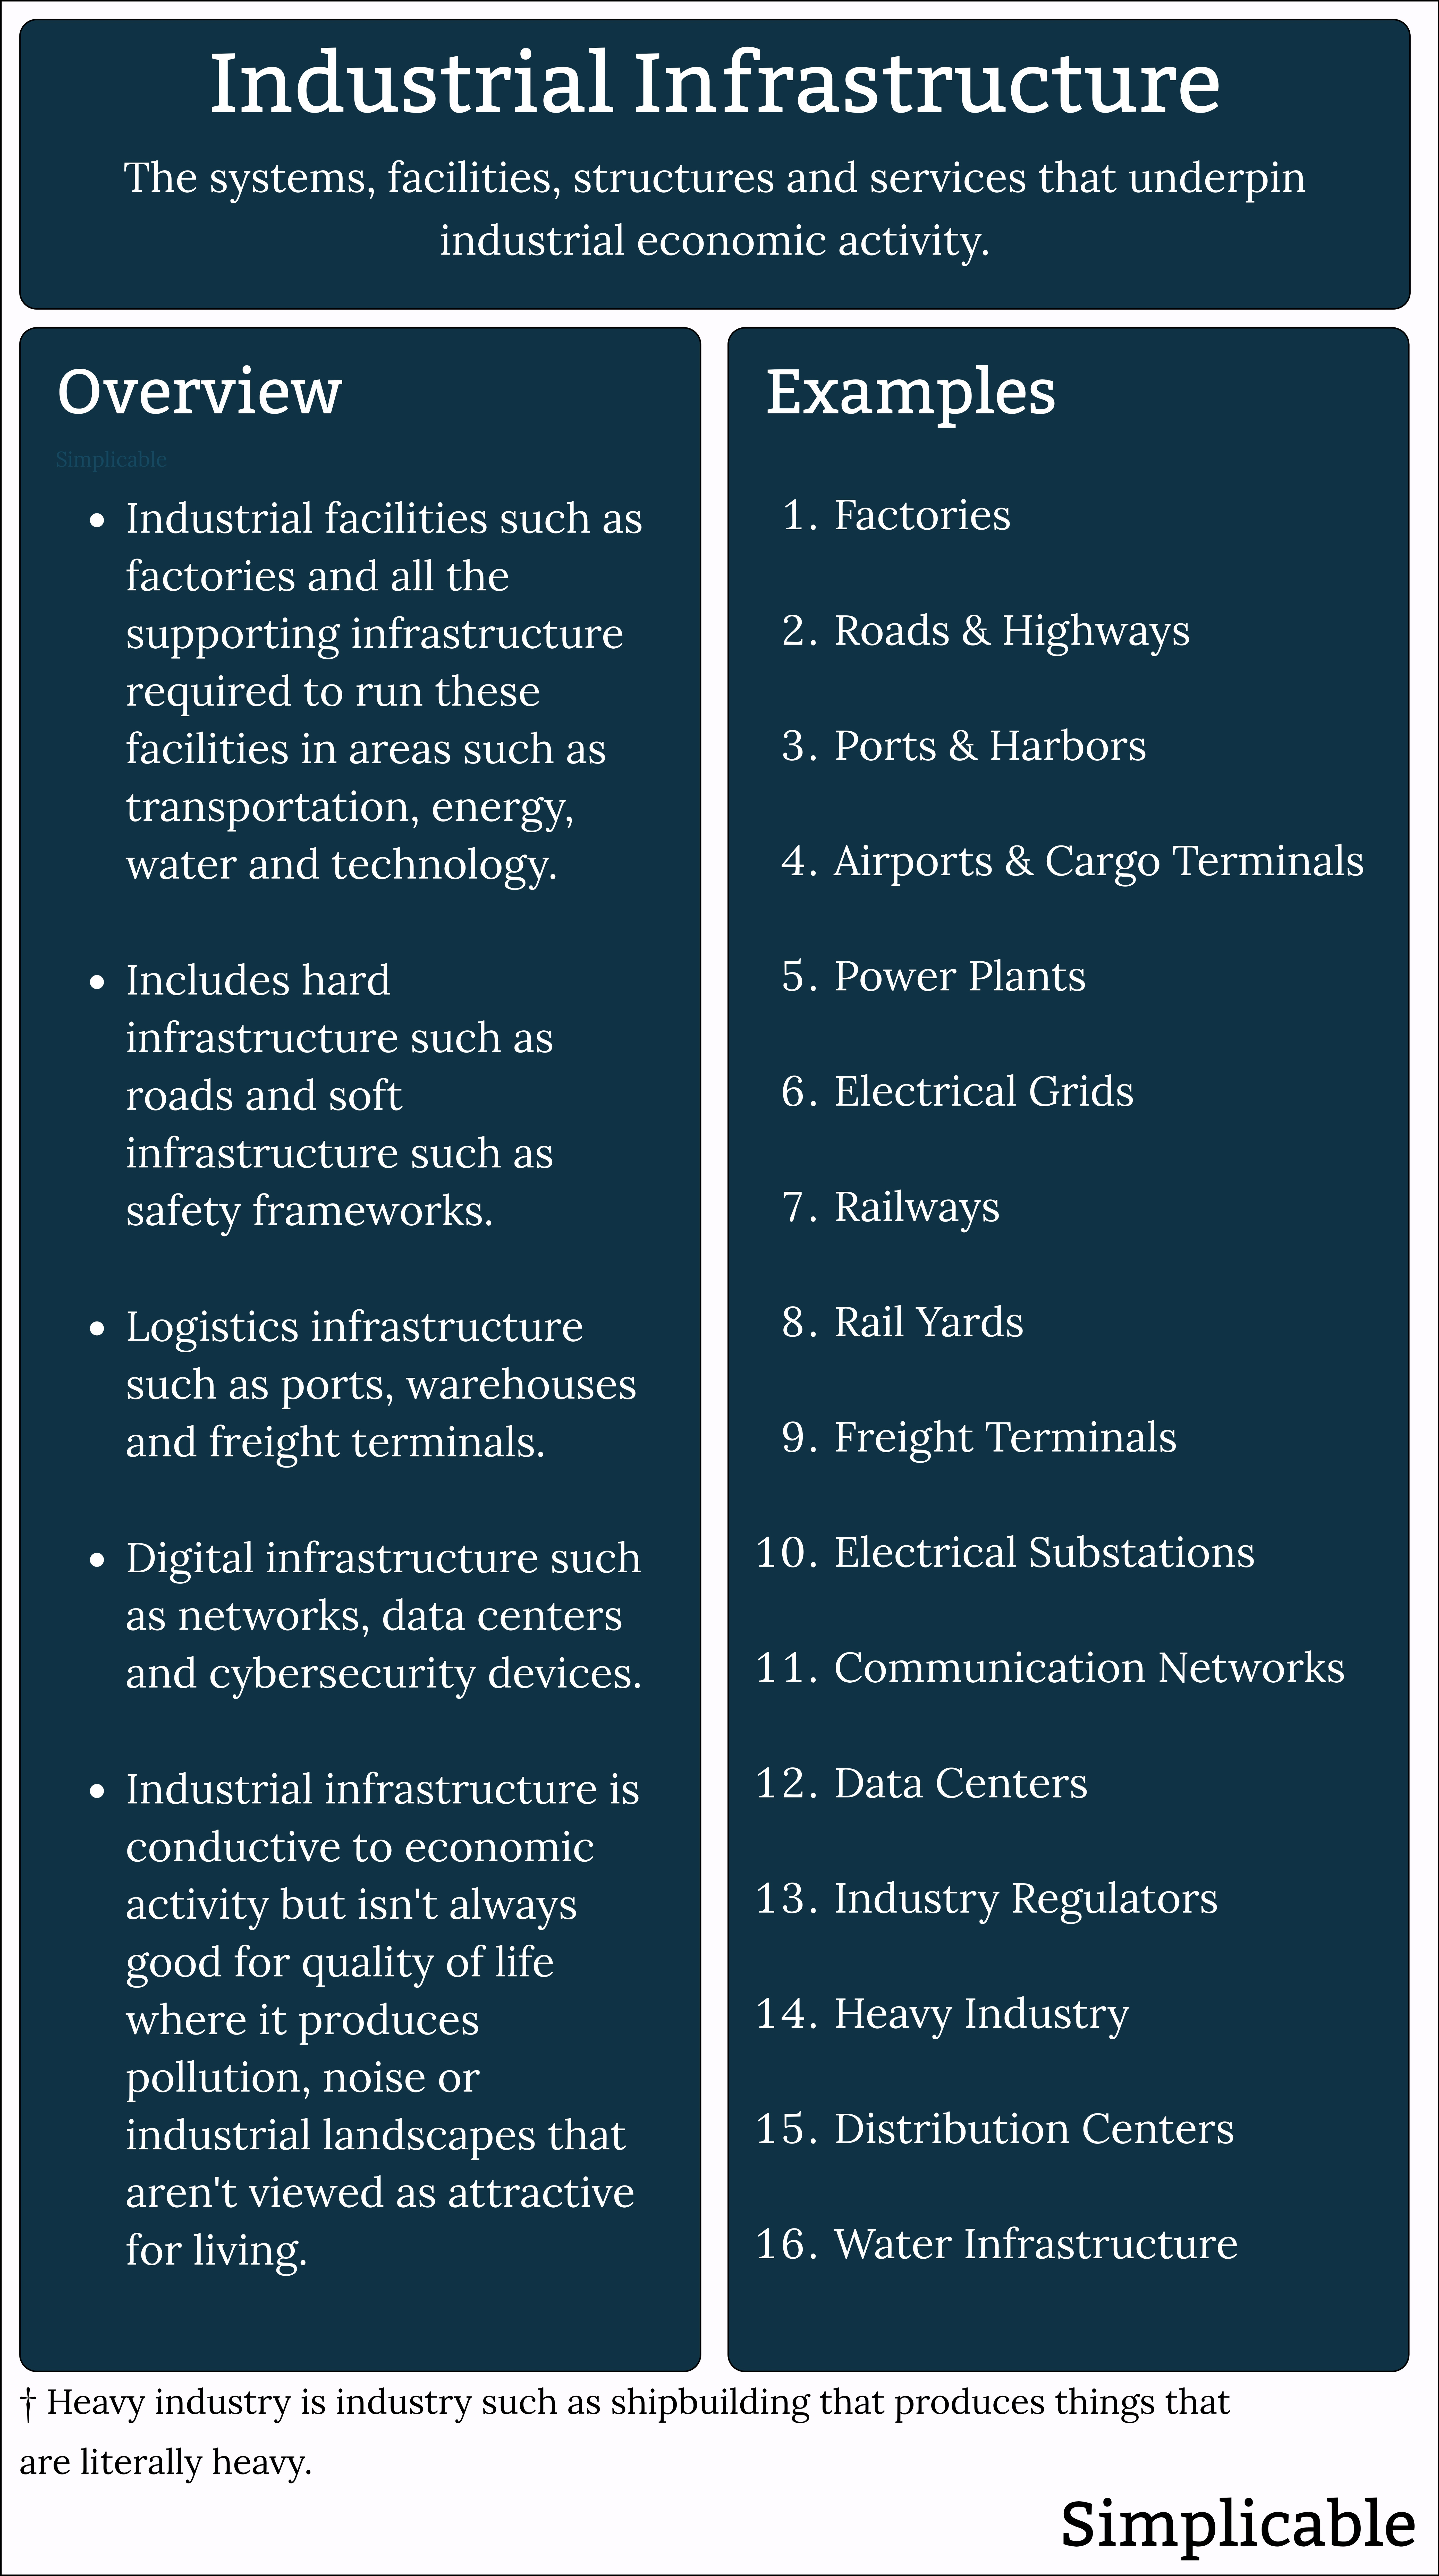 industrial infrastructure overview and examples